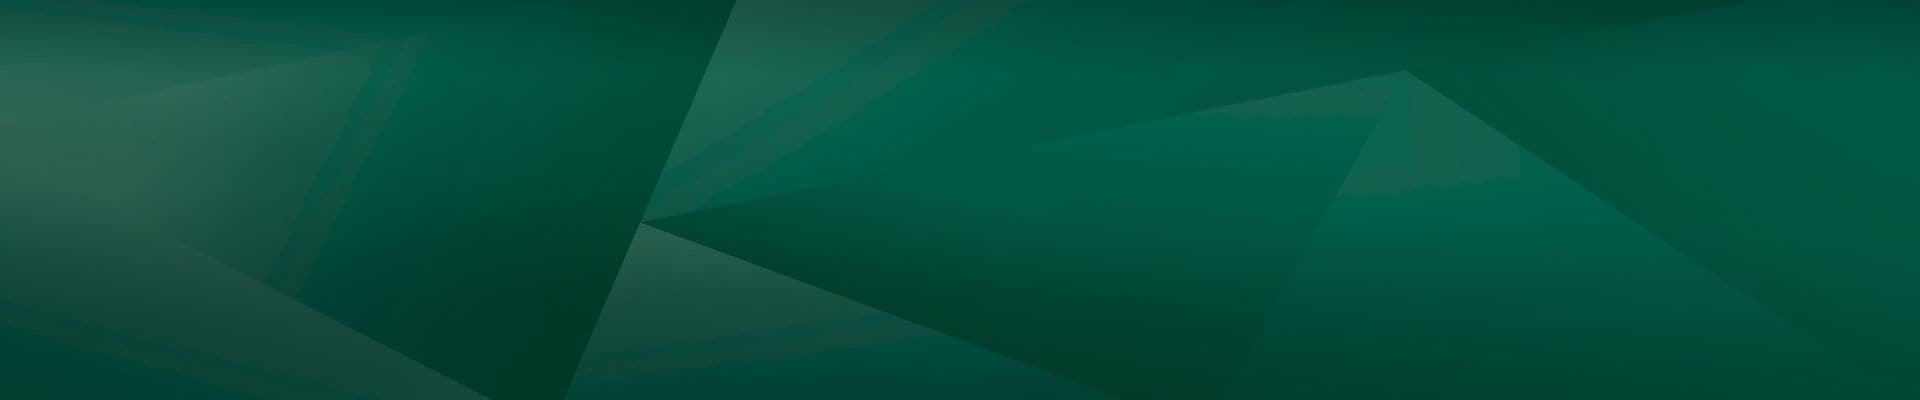 Green graphic to represent the Northern Trust brand colors